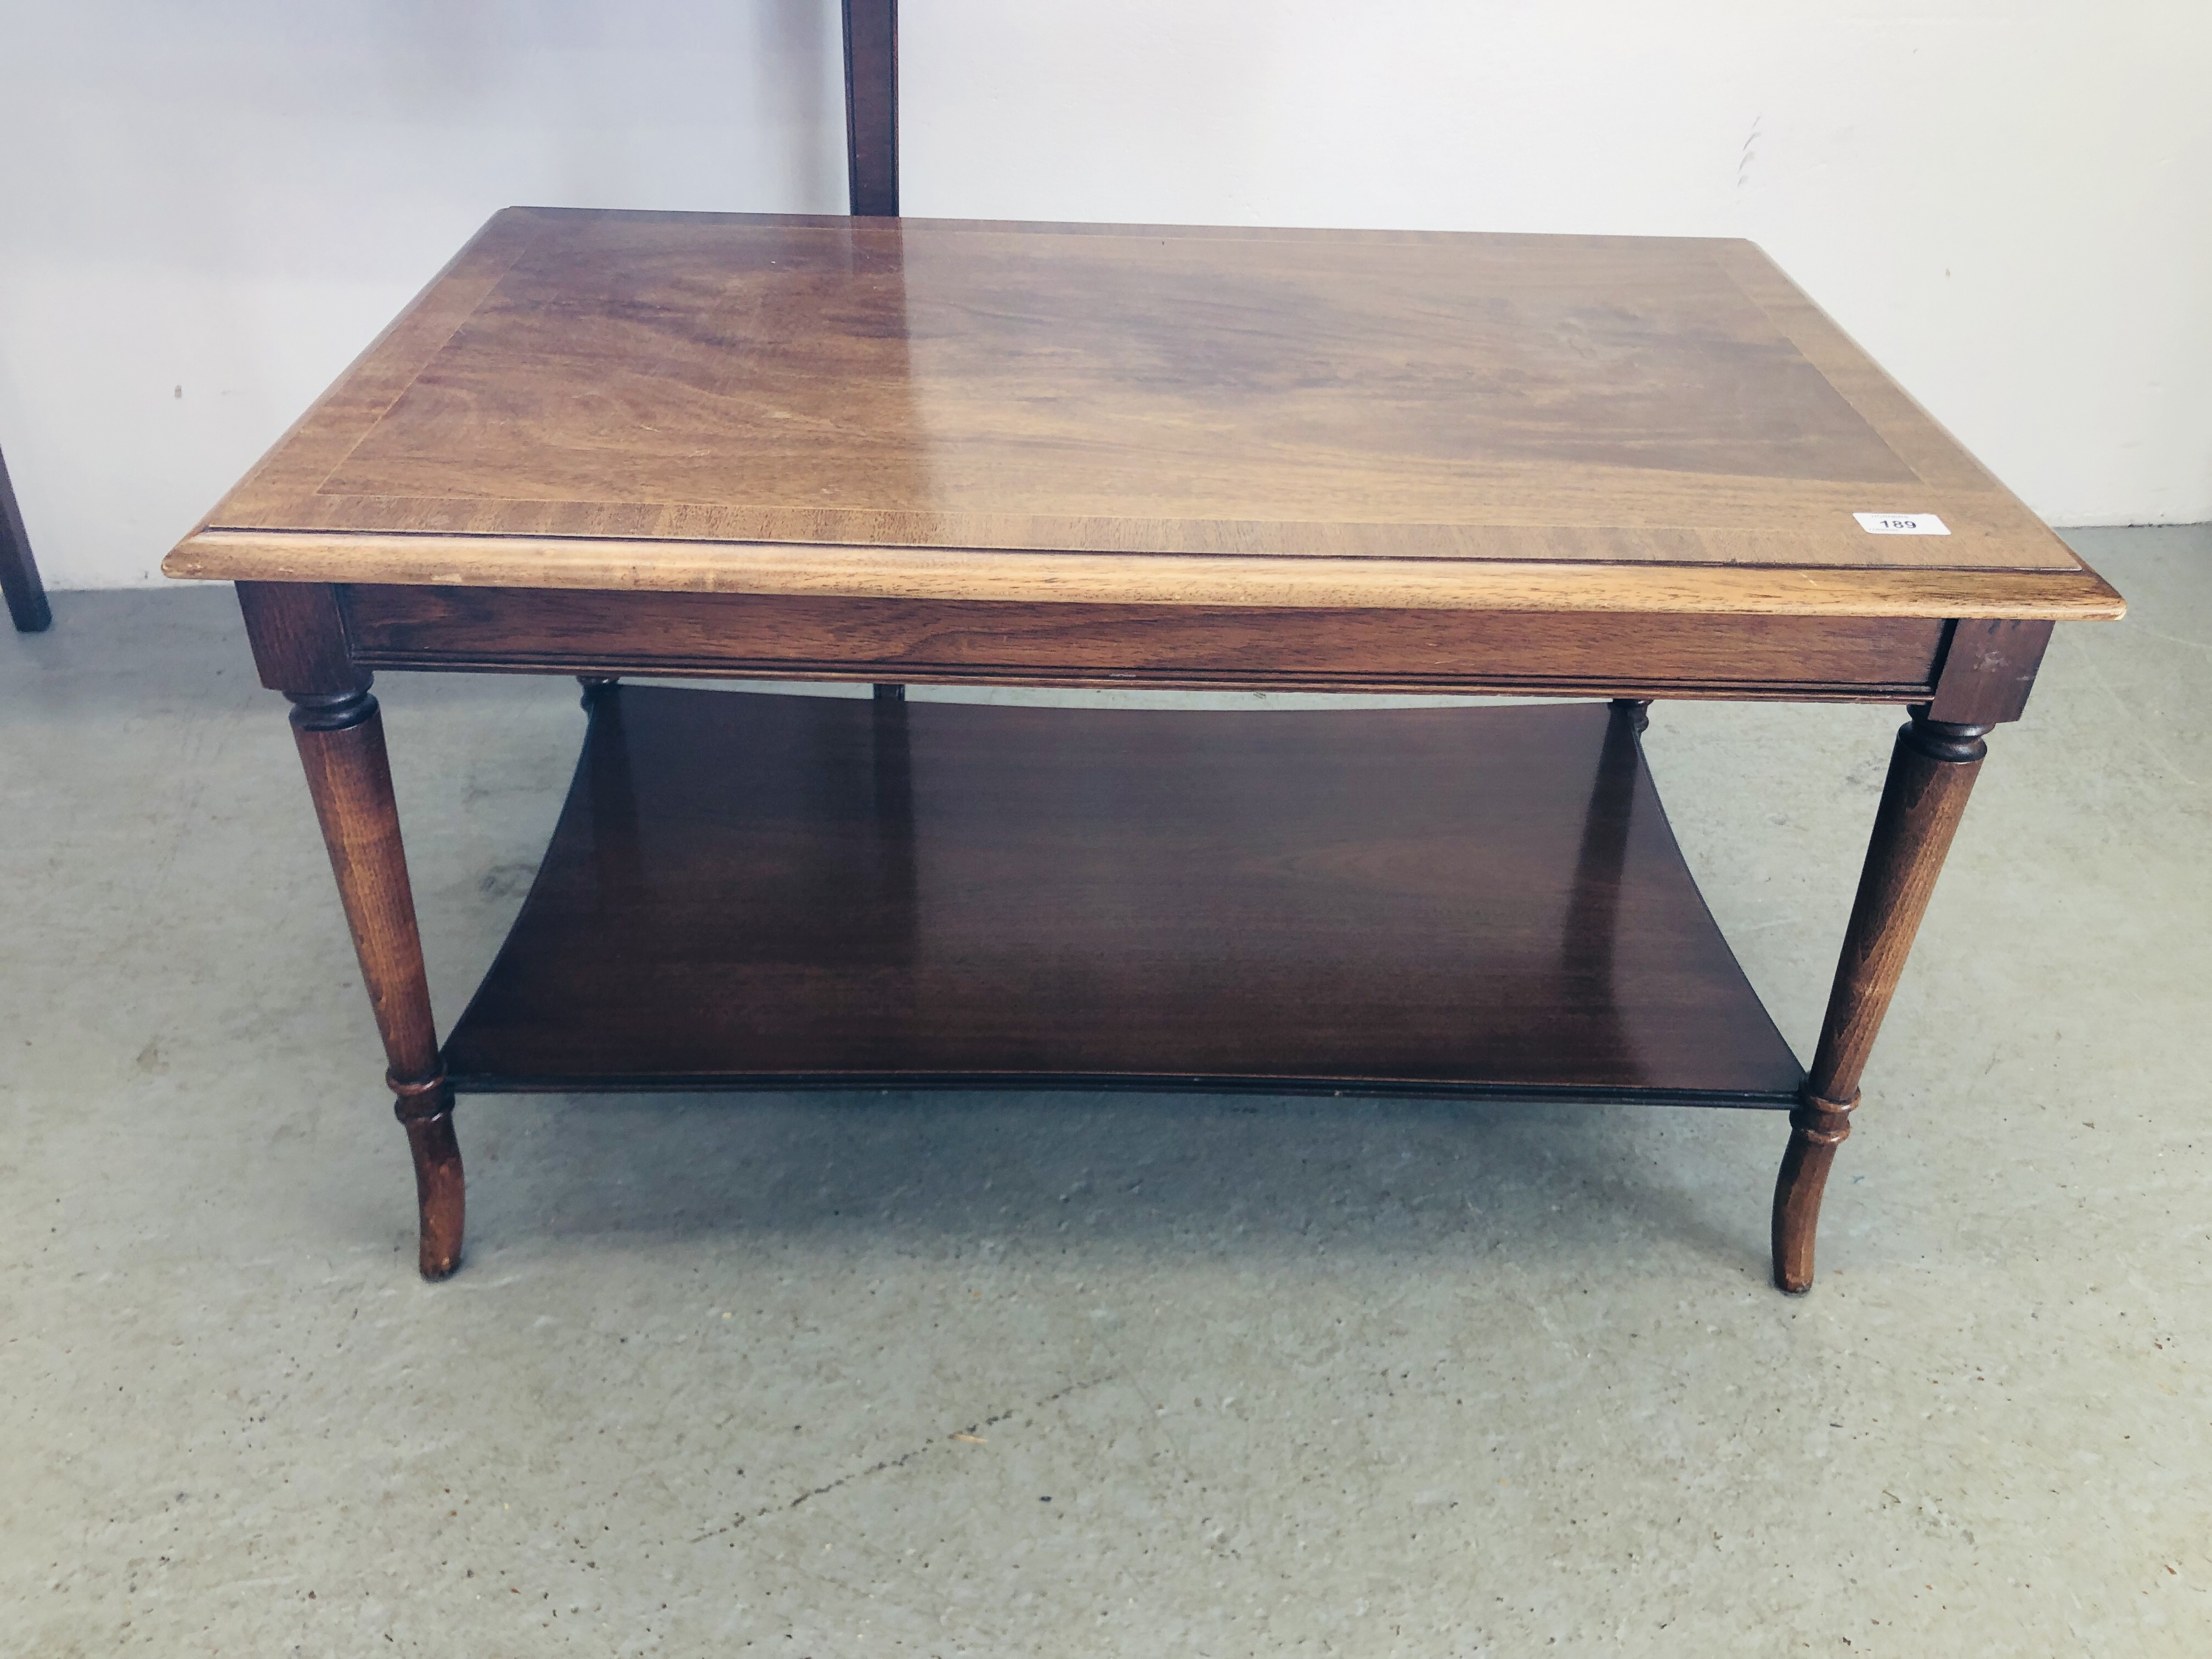 REPRODUCTION MAHOGANY FINISH COFFEE TABLE, BRADLEY MAKERS LABEL H 48CM, W 55CM, - Image 3 of 13